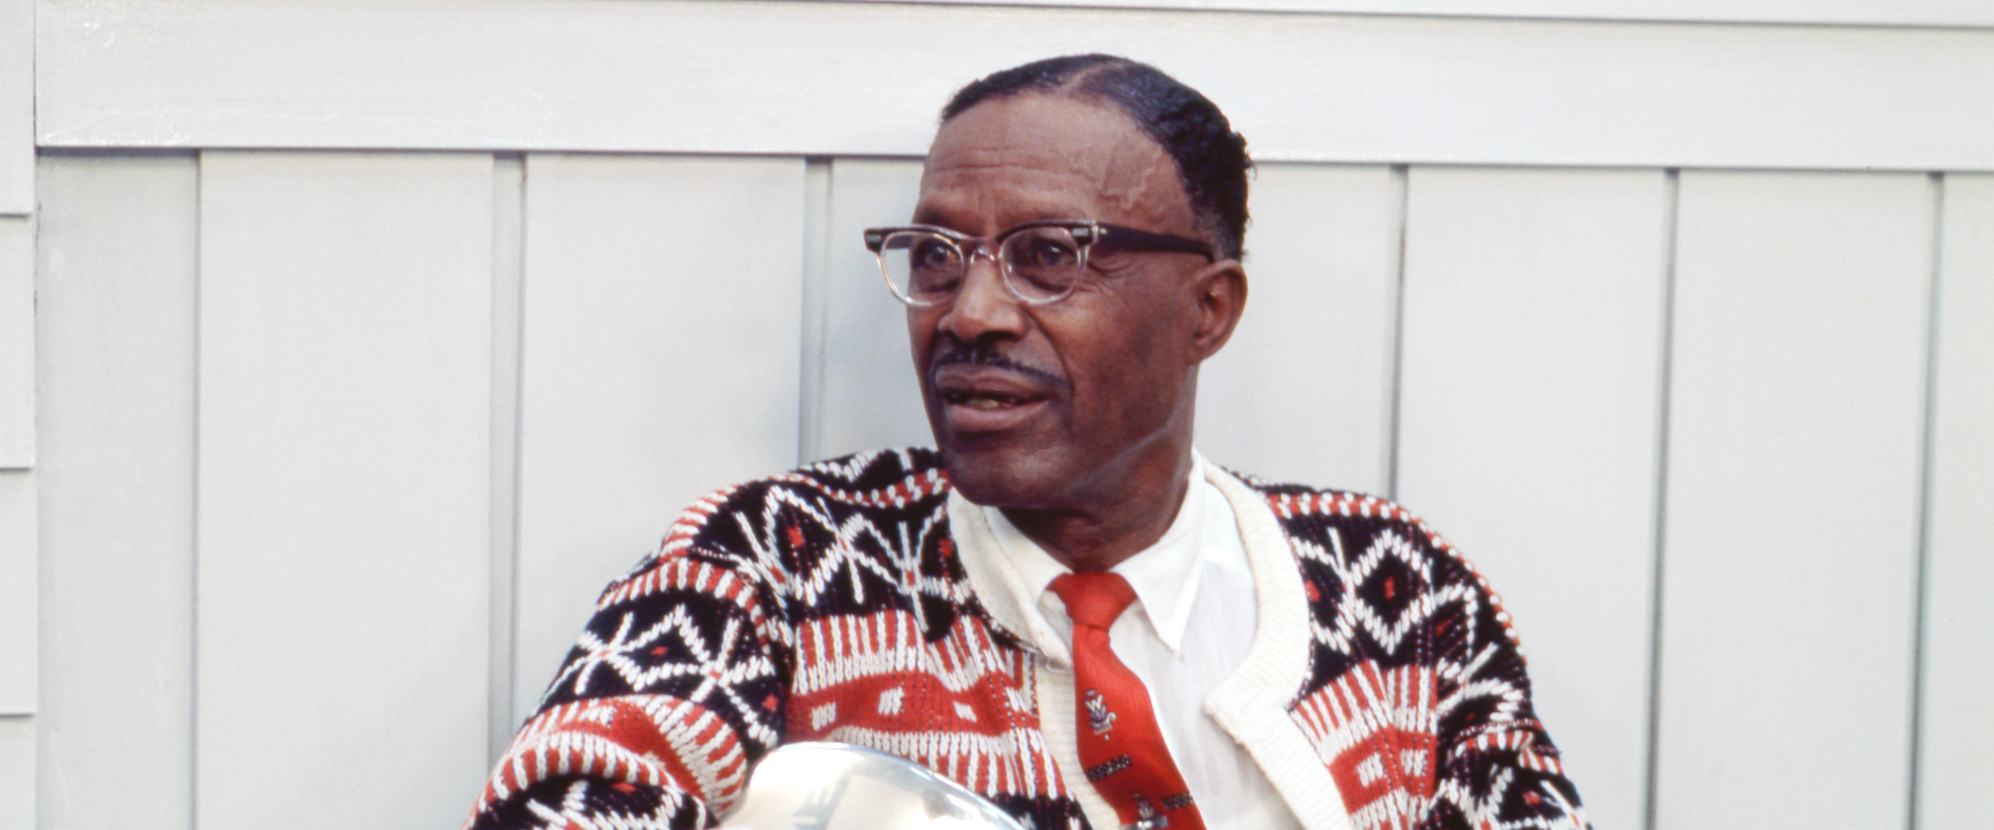 Exclusive Premiere: “Empire State Express” by Son House